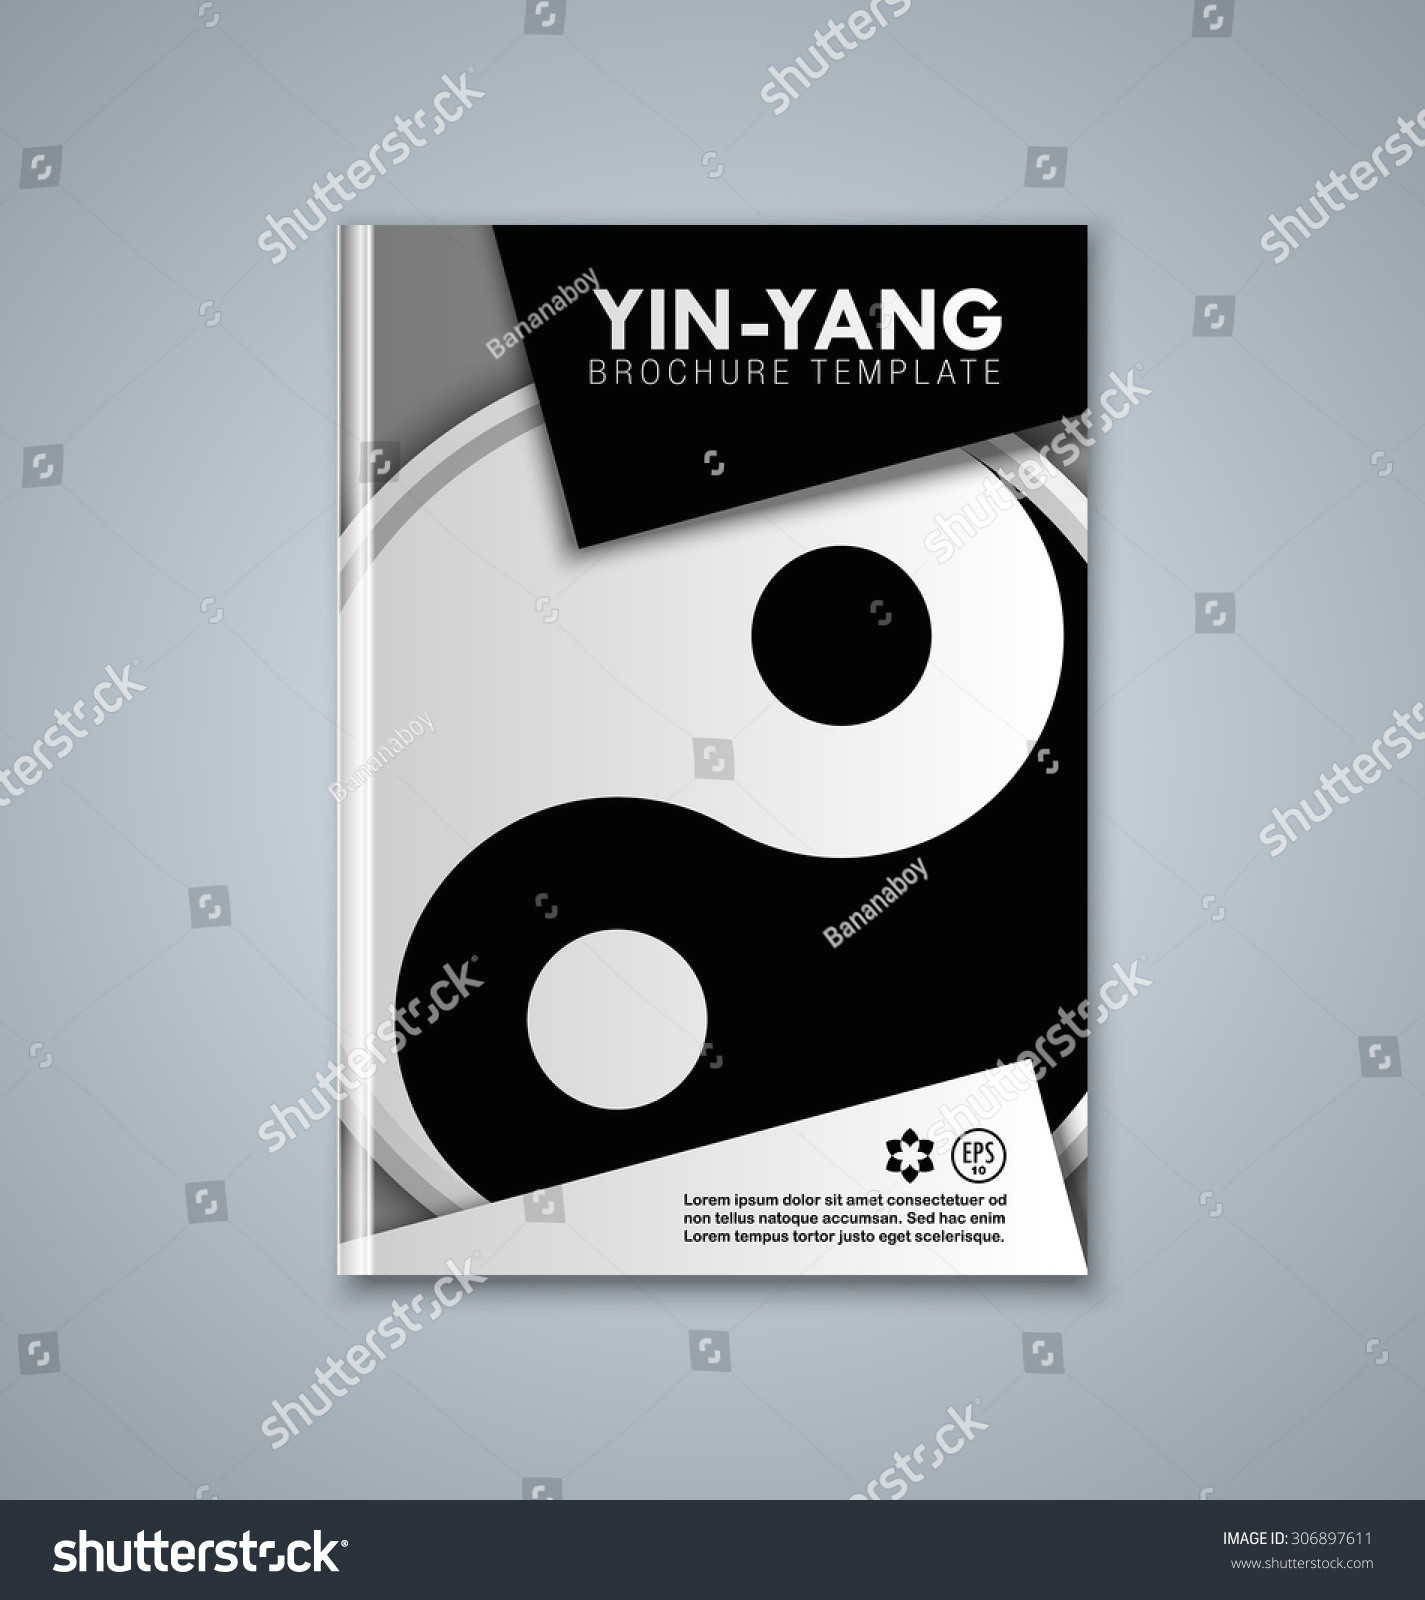 easy to draw book covers book report brochure template yin yang brochure book cover template of